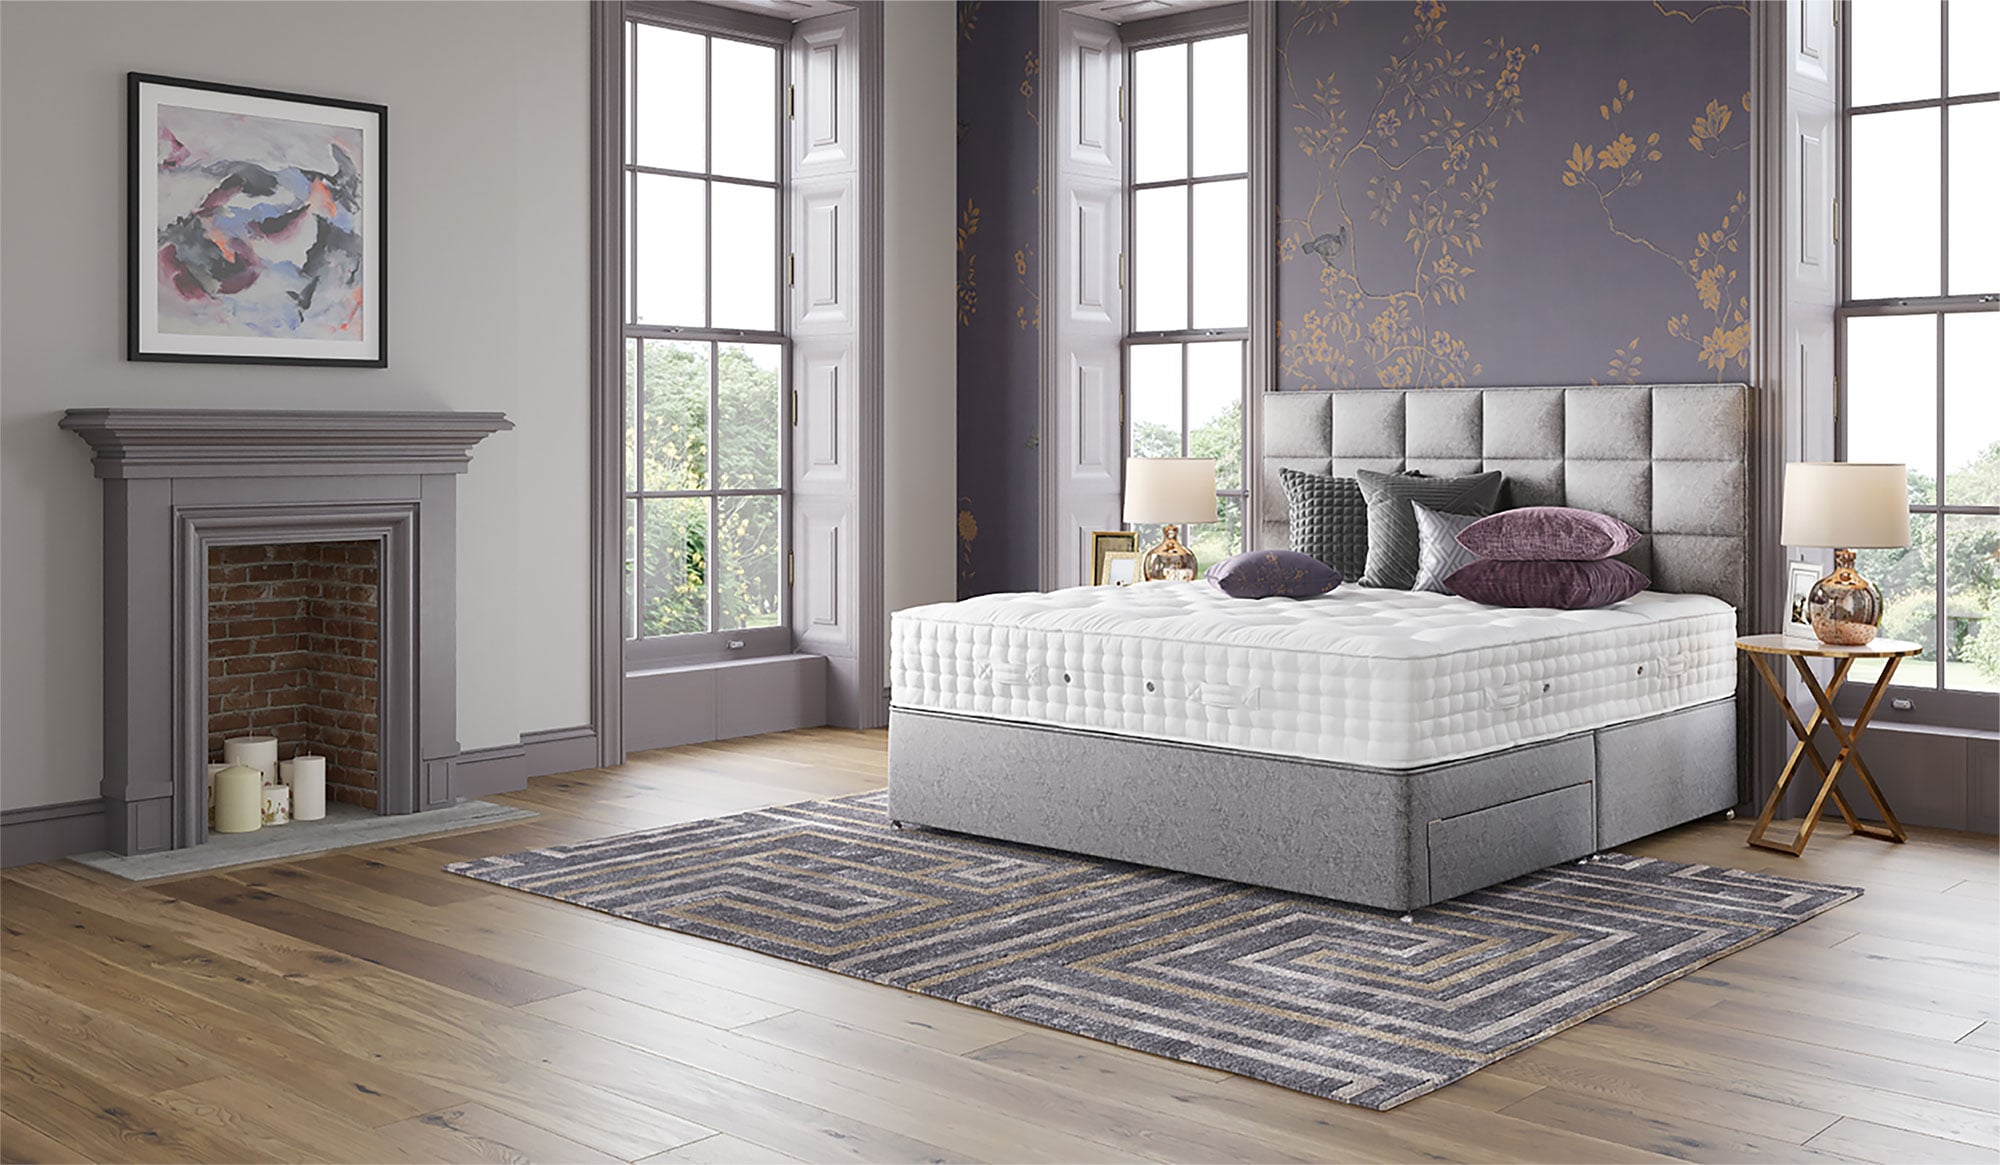 beds with mattresses for sale uk